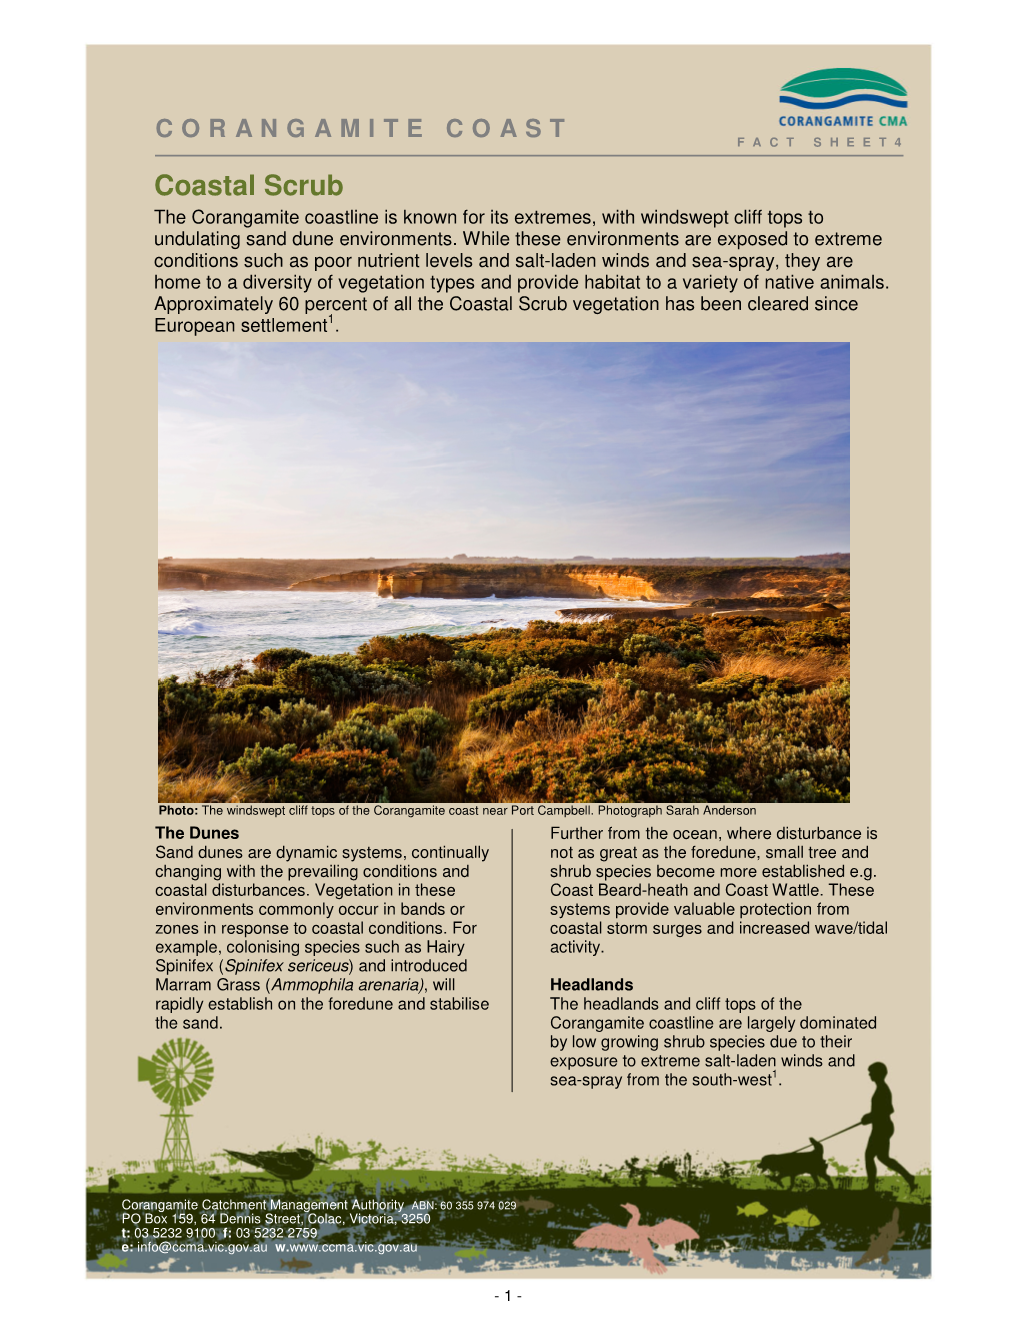 Coastal Scrub the Corangamite Coastline Is Known for Its Extremes, with Windswept Cliff Tops to Undulating Sand Dune Environments